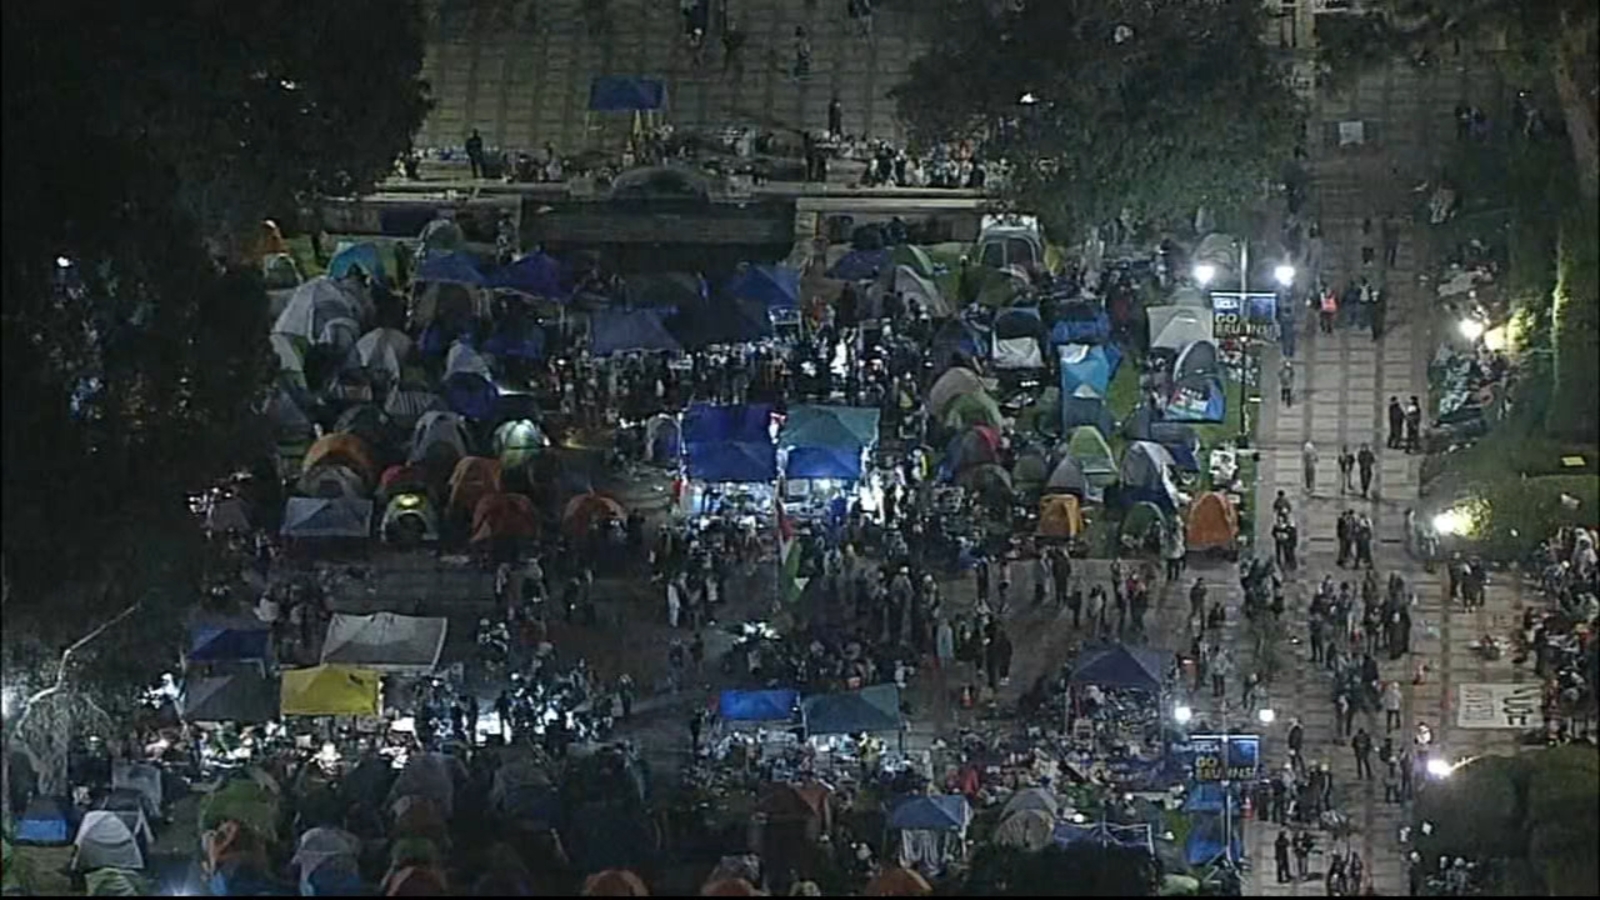 ucla-protest:-police-seeking-to-disperse-protesters-as-crowd-grows-in-size-|-watch-live